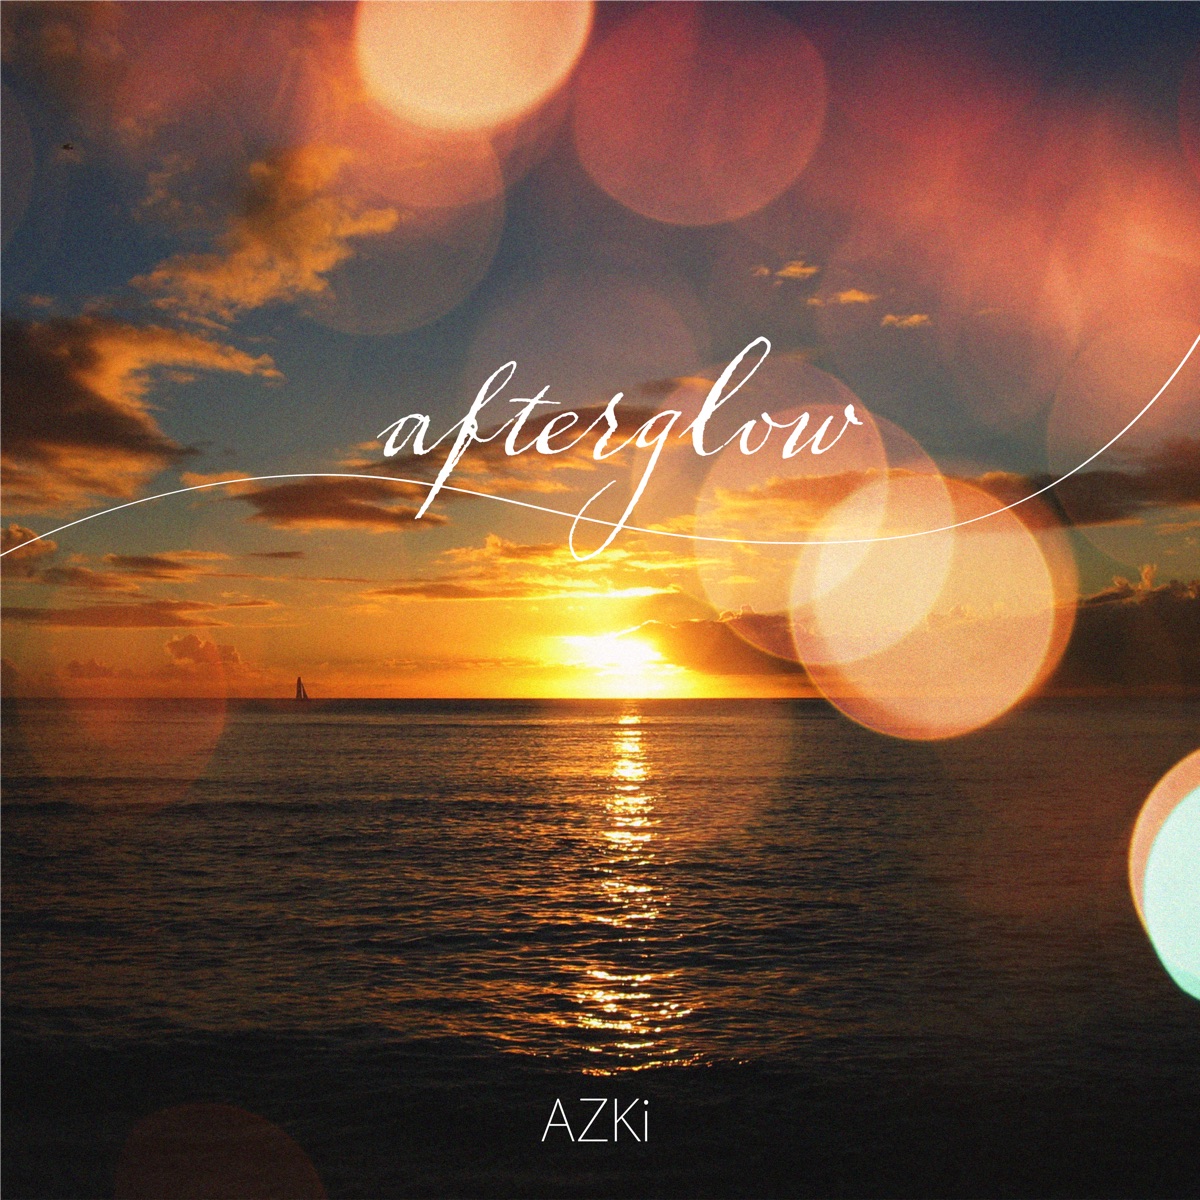 Cover art for『AZKi - afterglow』from the release『afterglow